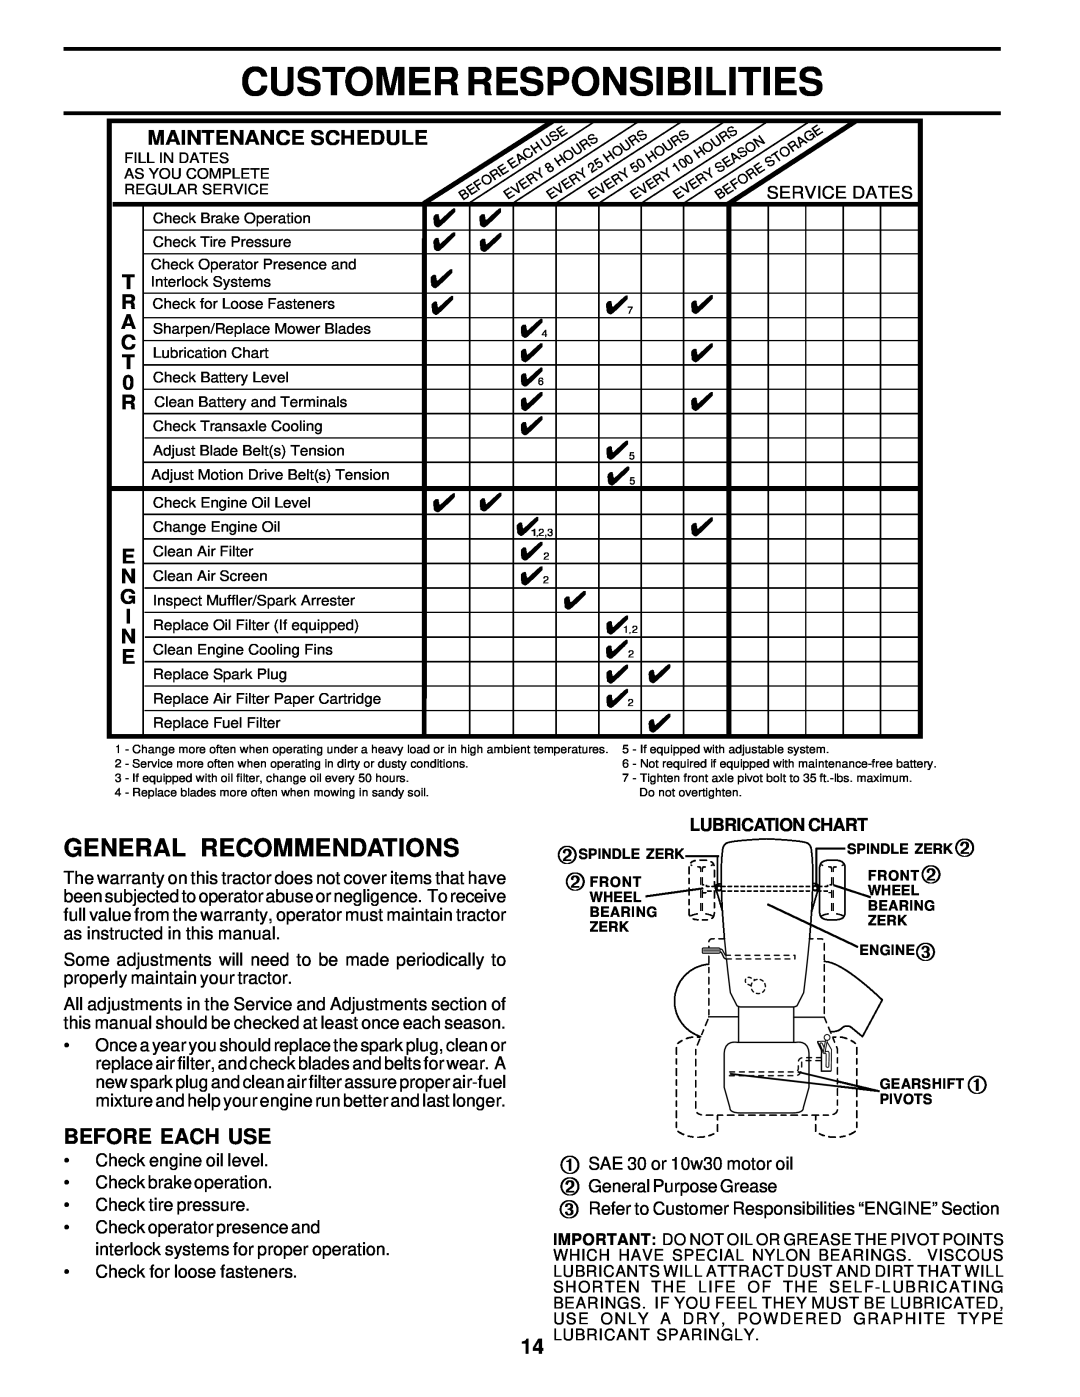 Poulan 176851 owner manual Customer Responsibilities, General Recommendations, Before Each Use 